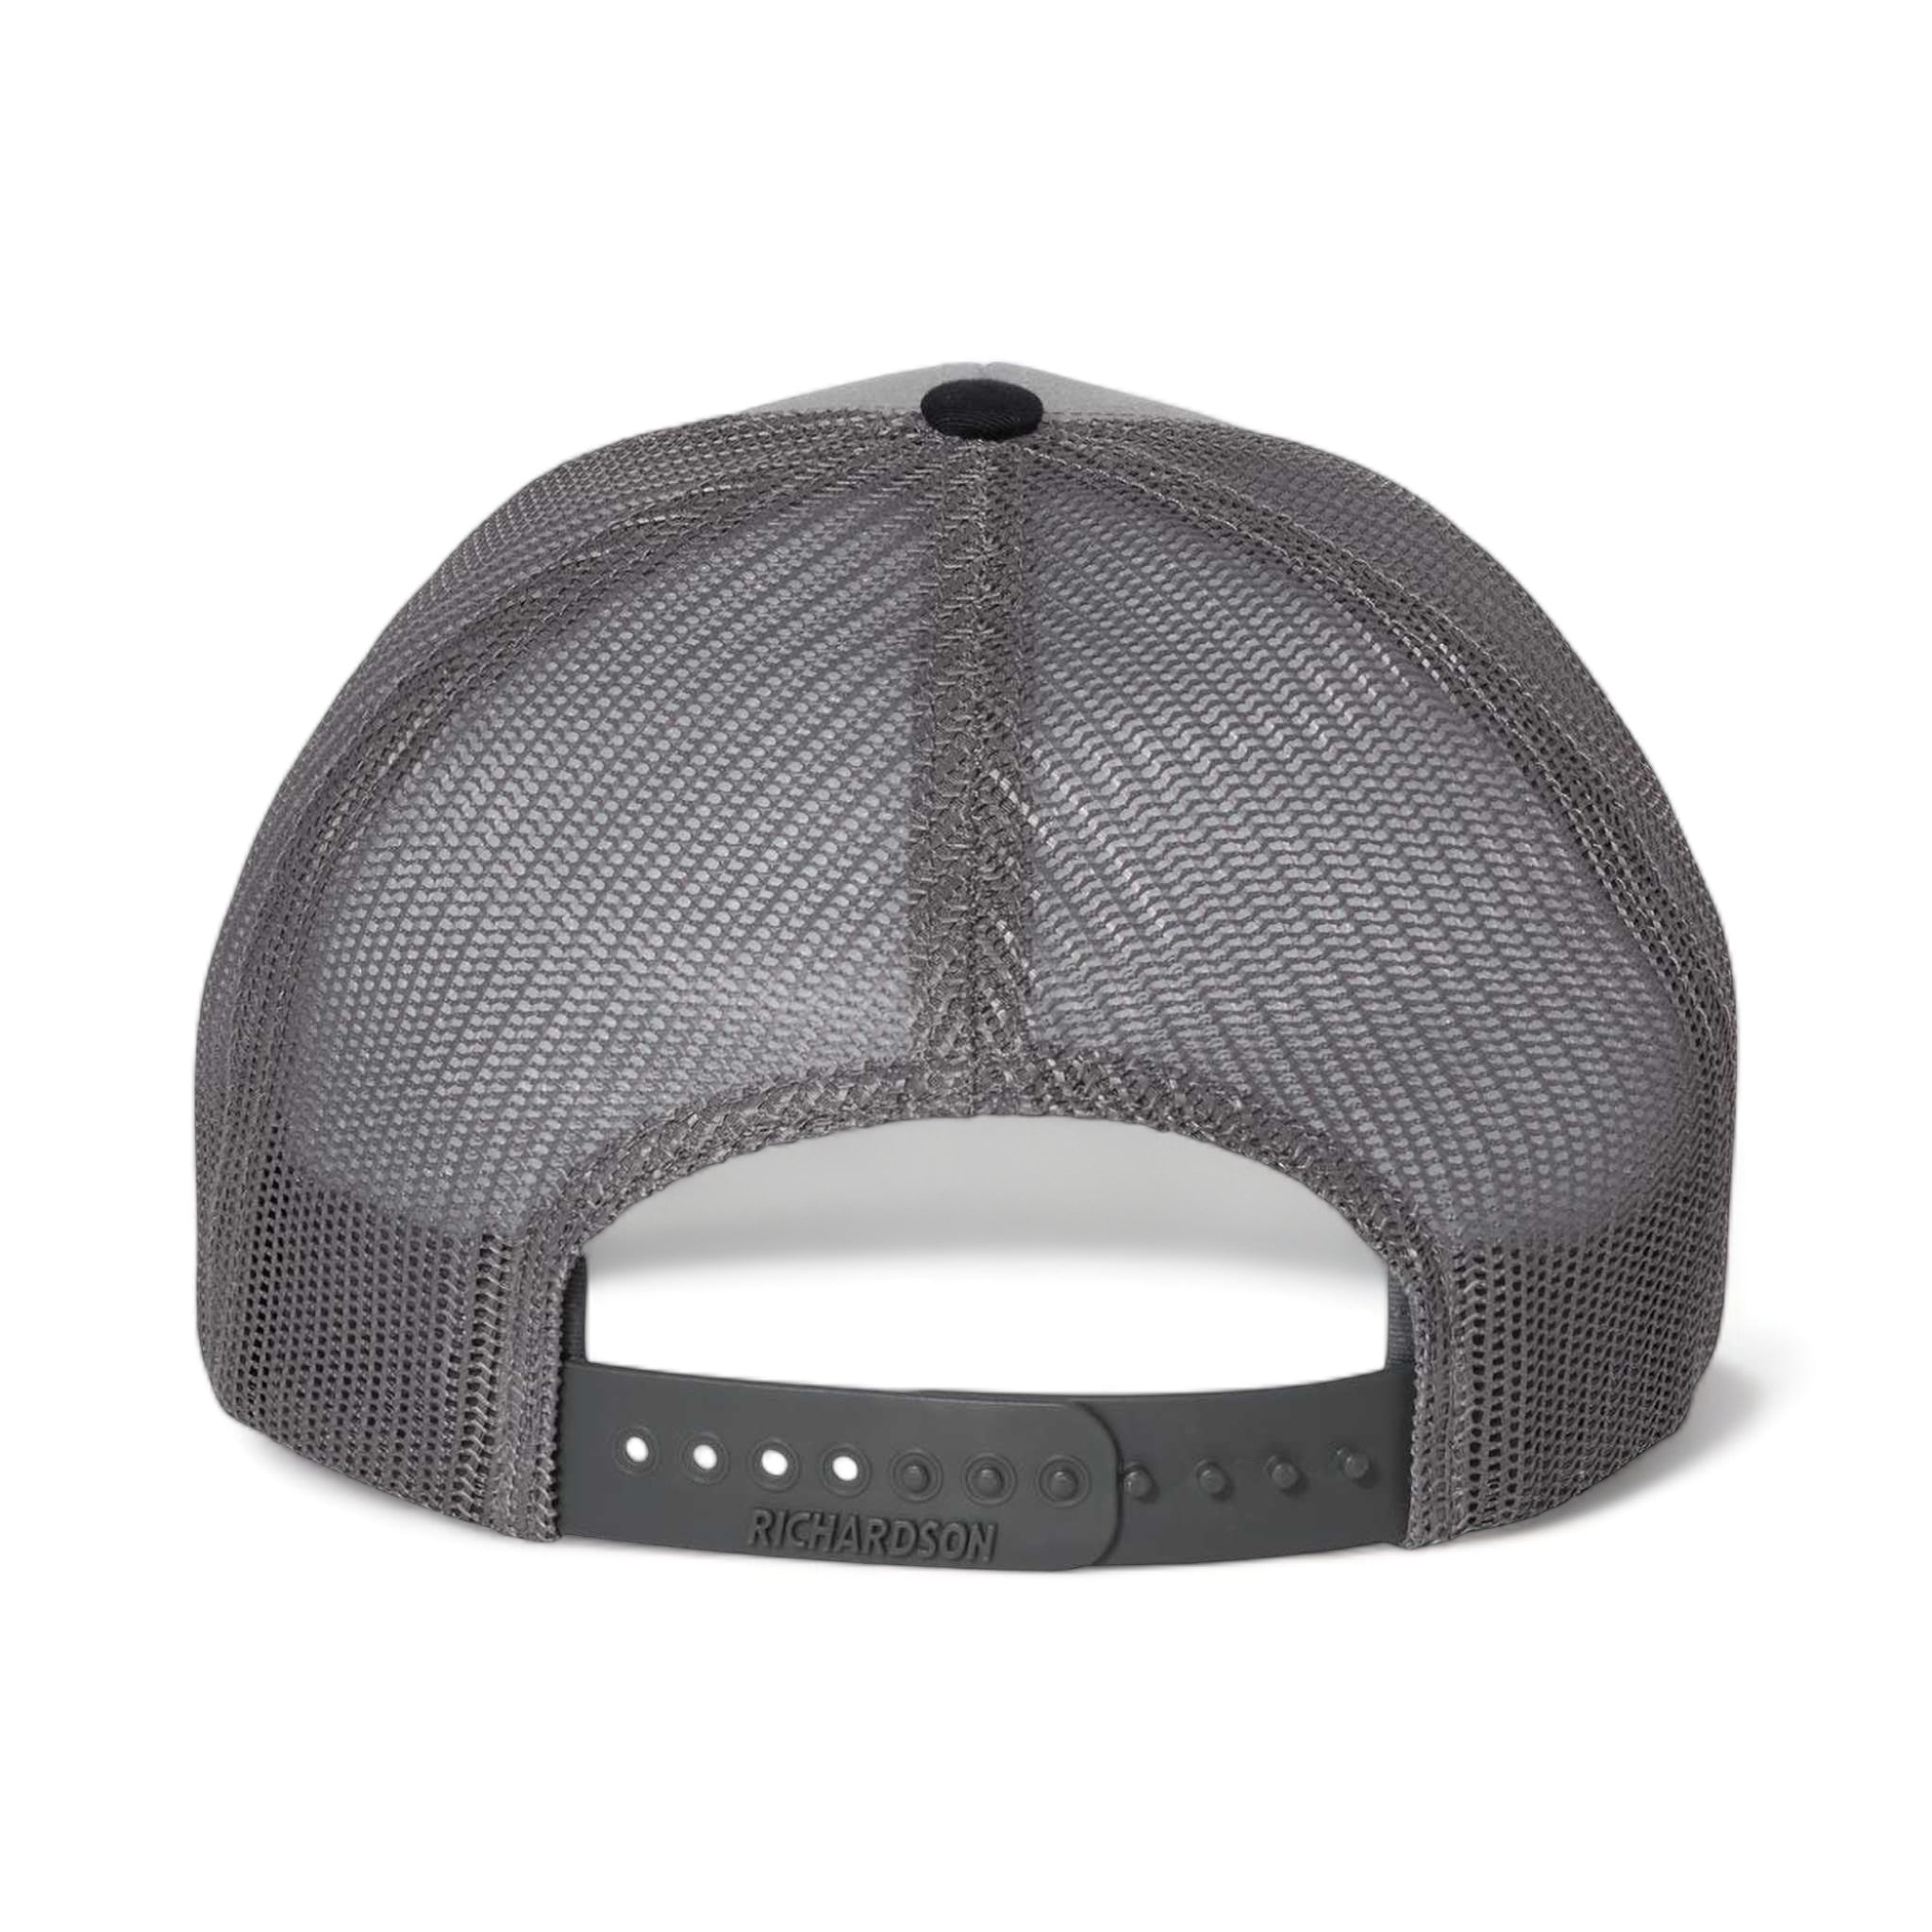 Back view of Richardson 112 custom hat in grey, charcoal and navy